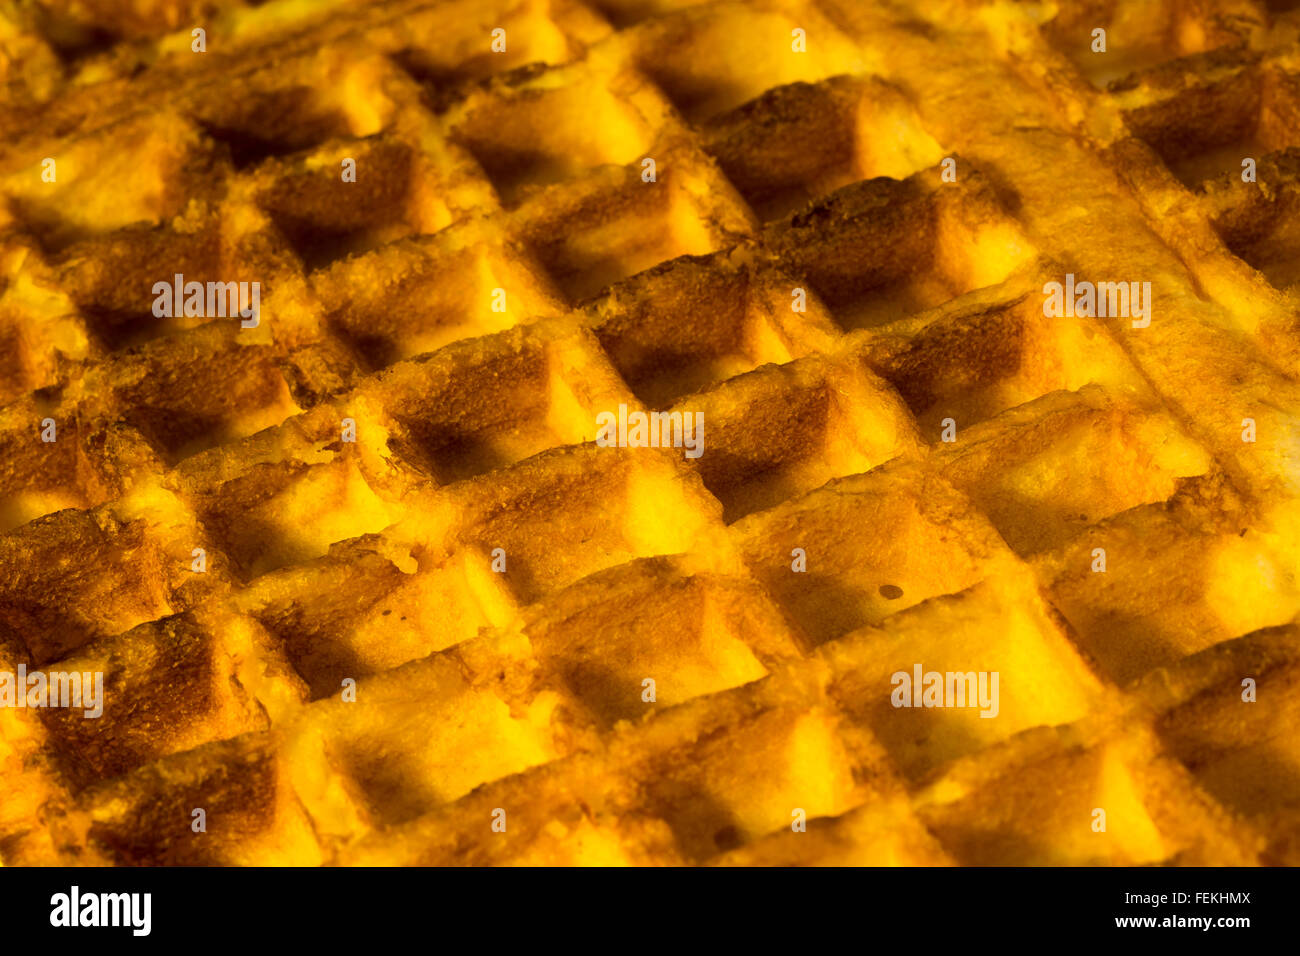 Honeycombed waffle texture - as visual metaphor for concept of cells, cellular, data storage / retrieval, filing systems, data. Stock Photo